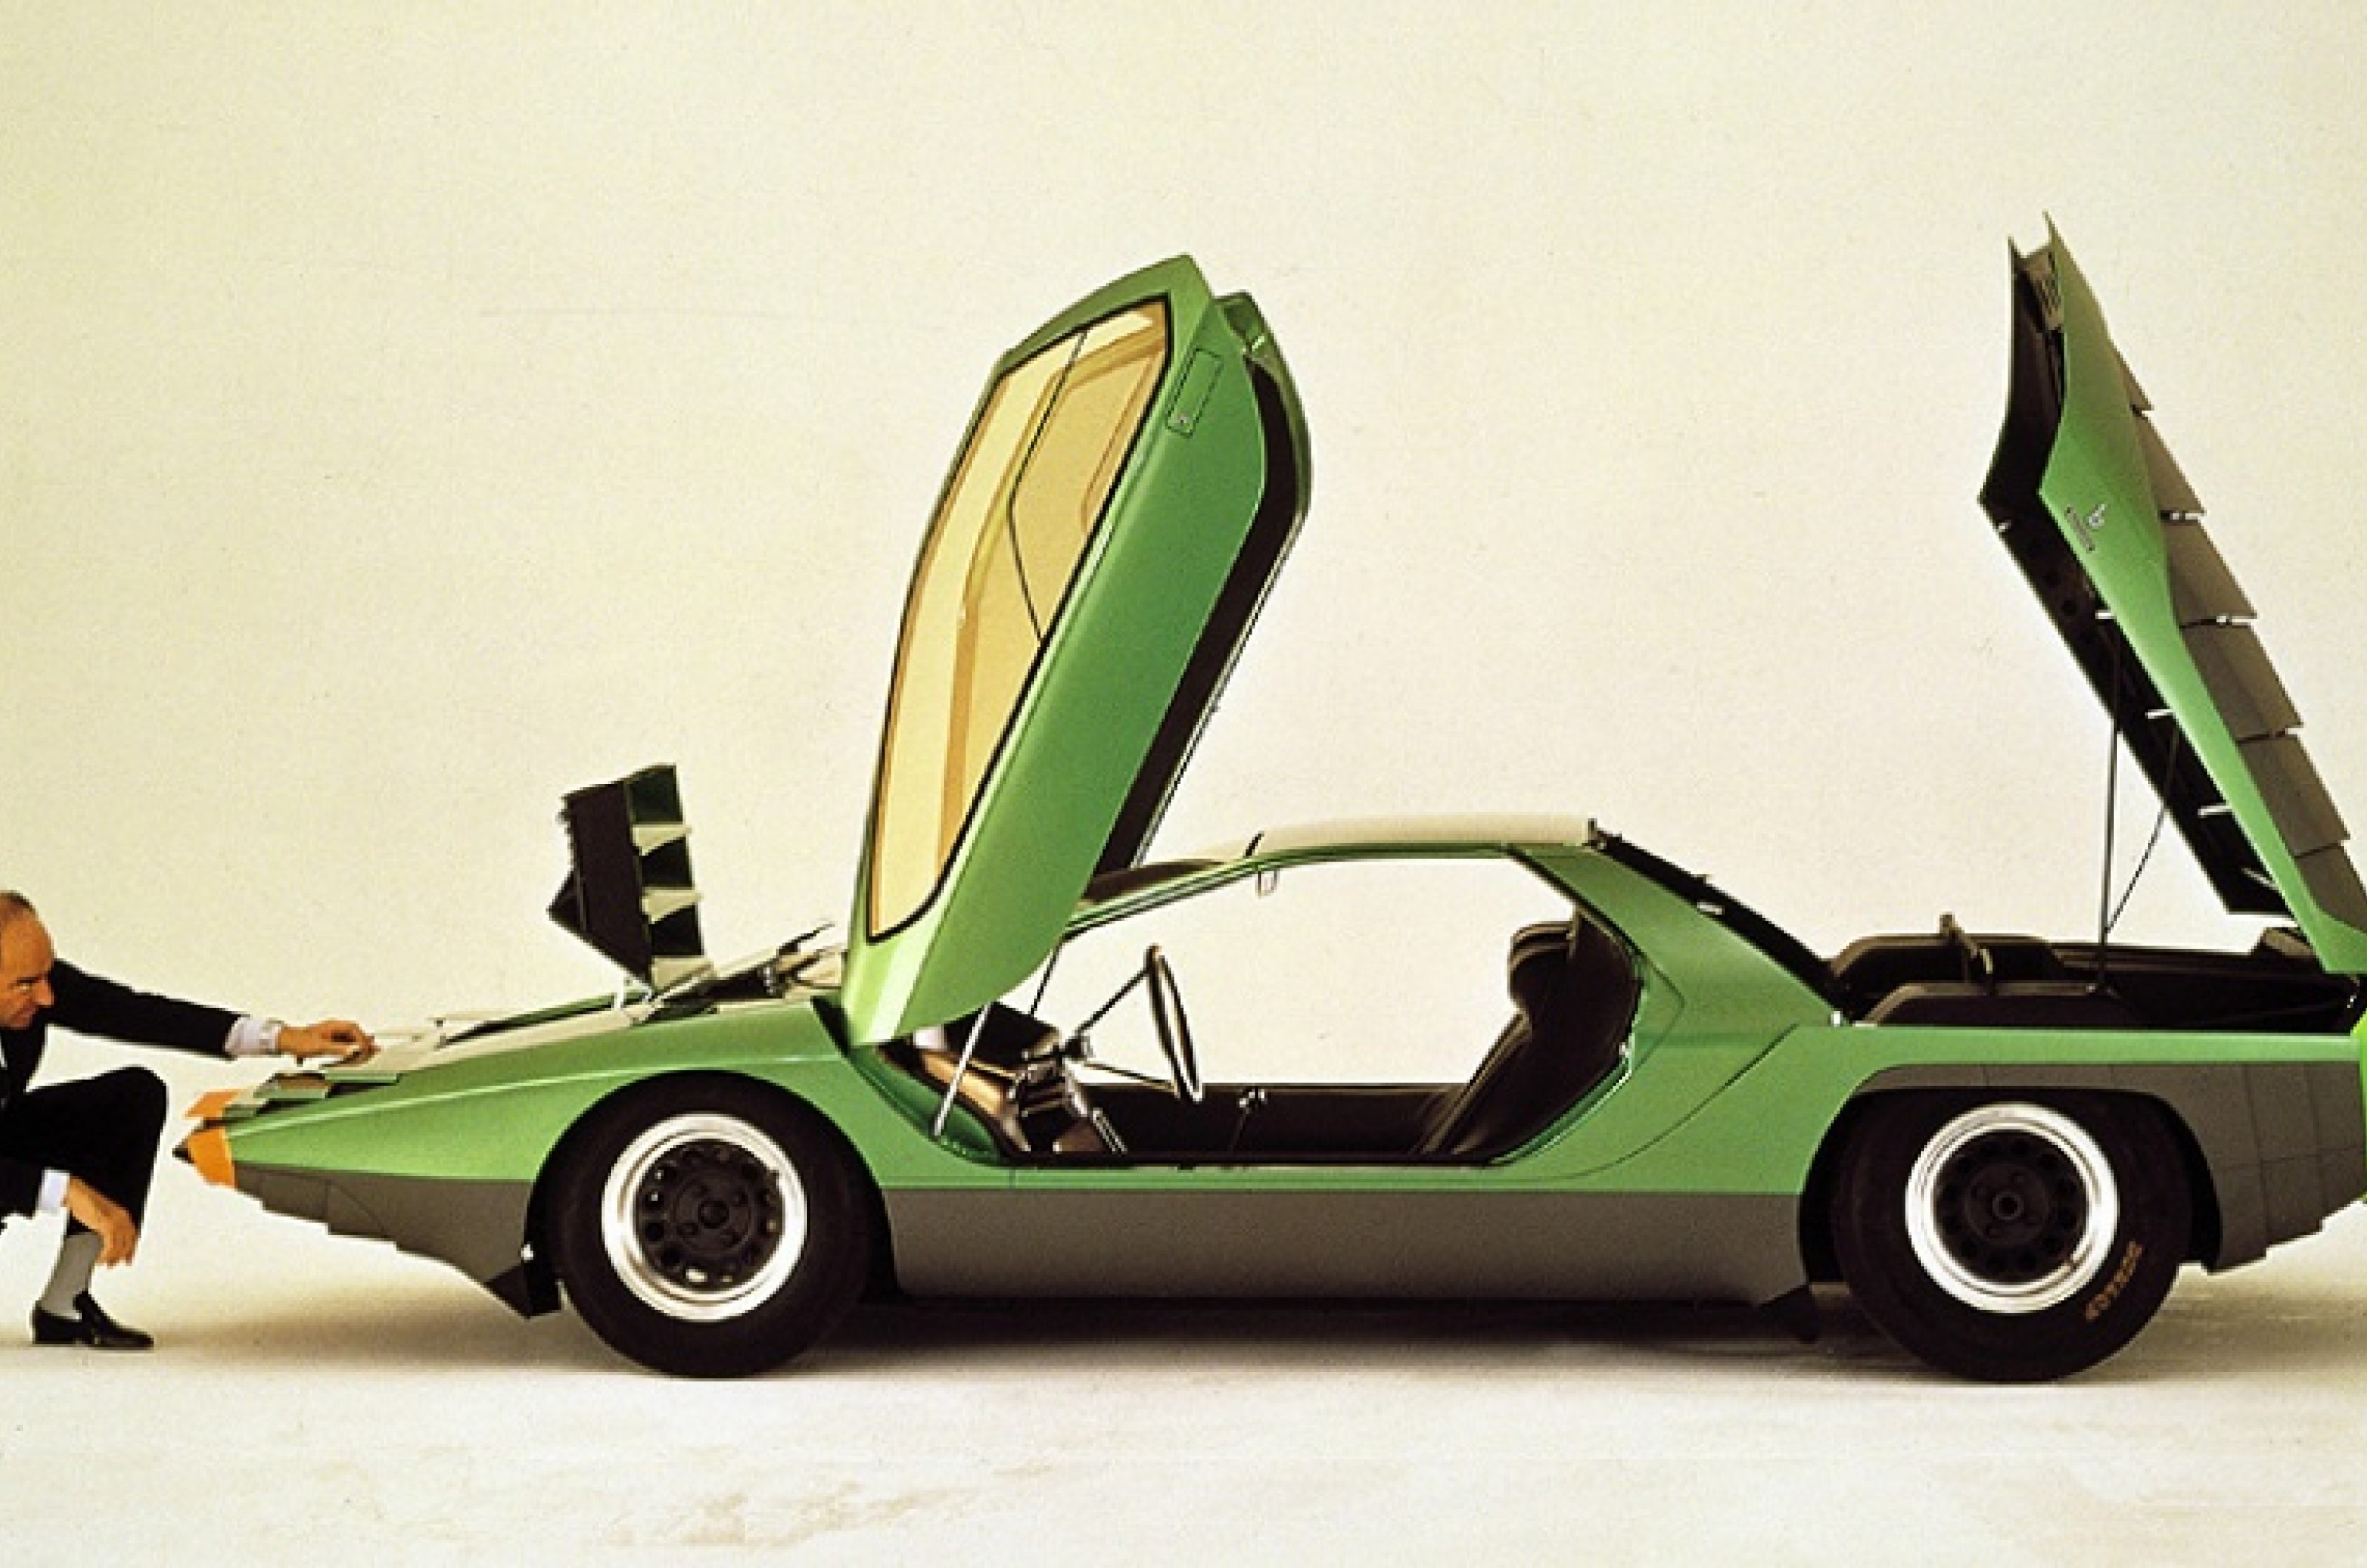 <p>Looking back on Alfa Romeo’s Carabo concept, it can get lost in an array of wedge-shaped cars from the ’70s and ’80s, until it’s contextualized in the 1960s.</p>  <p>The Carabo is often regarded as ground zero for the wedge-shaped designs that came after it.</p>  <p>However, it is also said to be the first car that featured scissor doors. Over the years these have become synonymous with high-performance vehicles and have been reinvented in countless ways following the same basic mechanism.</p>  <p>Therefore, without the Carabo, we might never have been blessed with the Lamborghini Countach, which was crafted by the same designer, Marcello Gandini.</p>